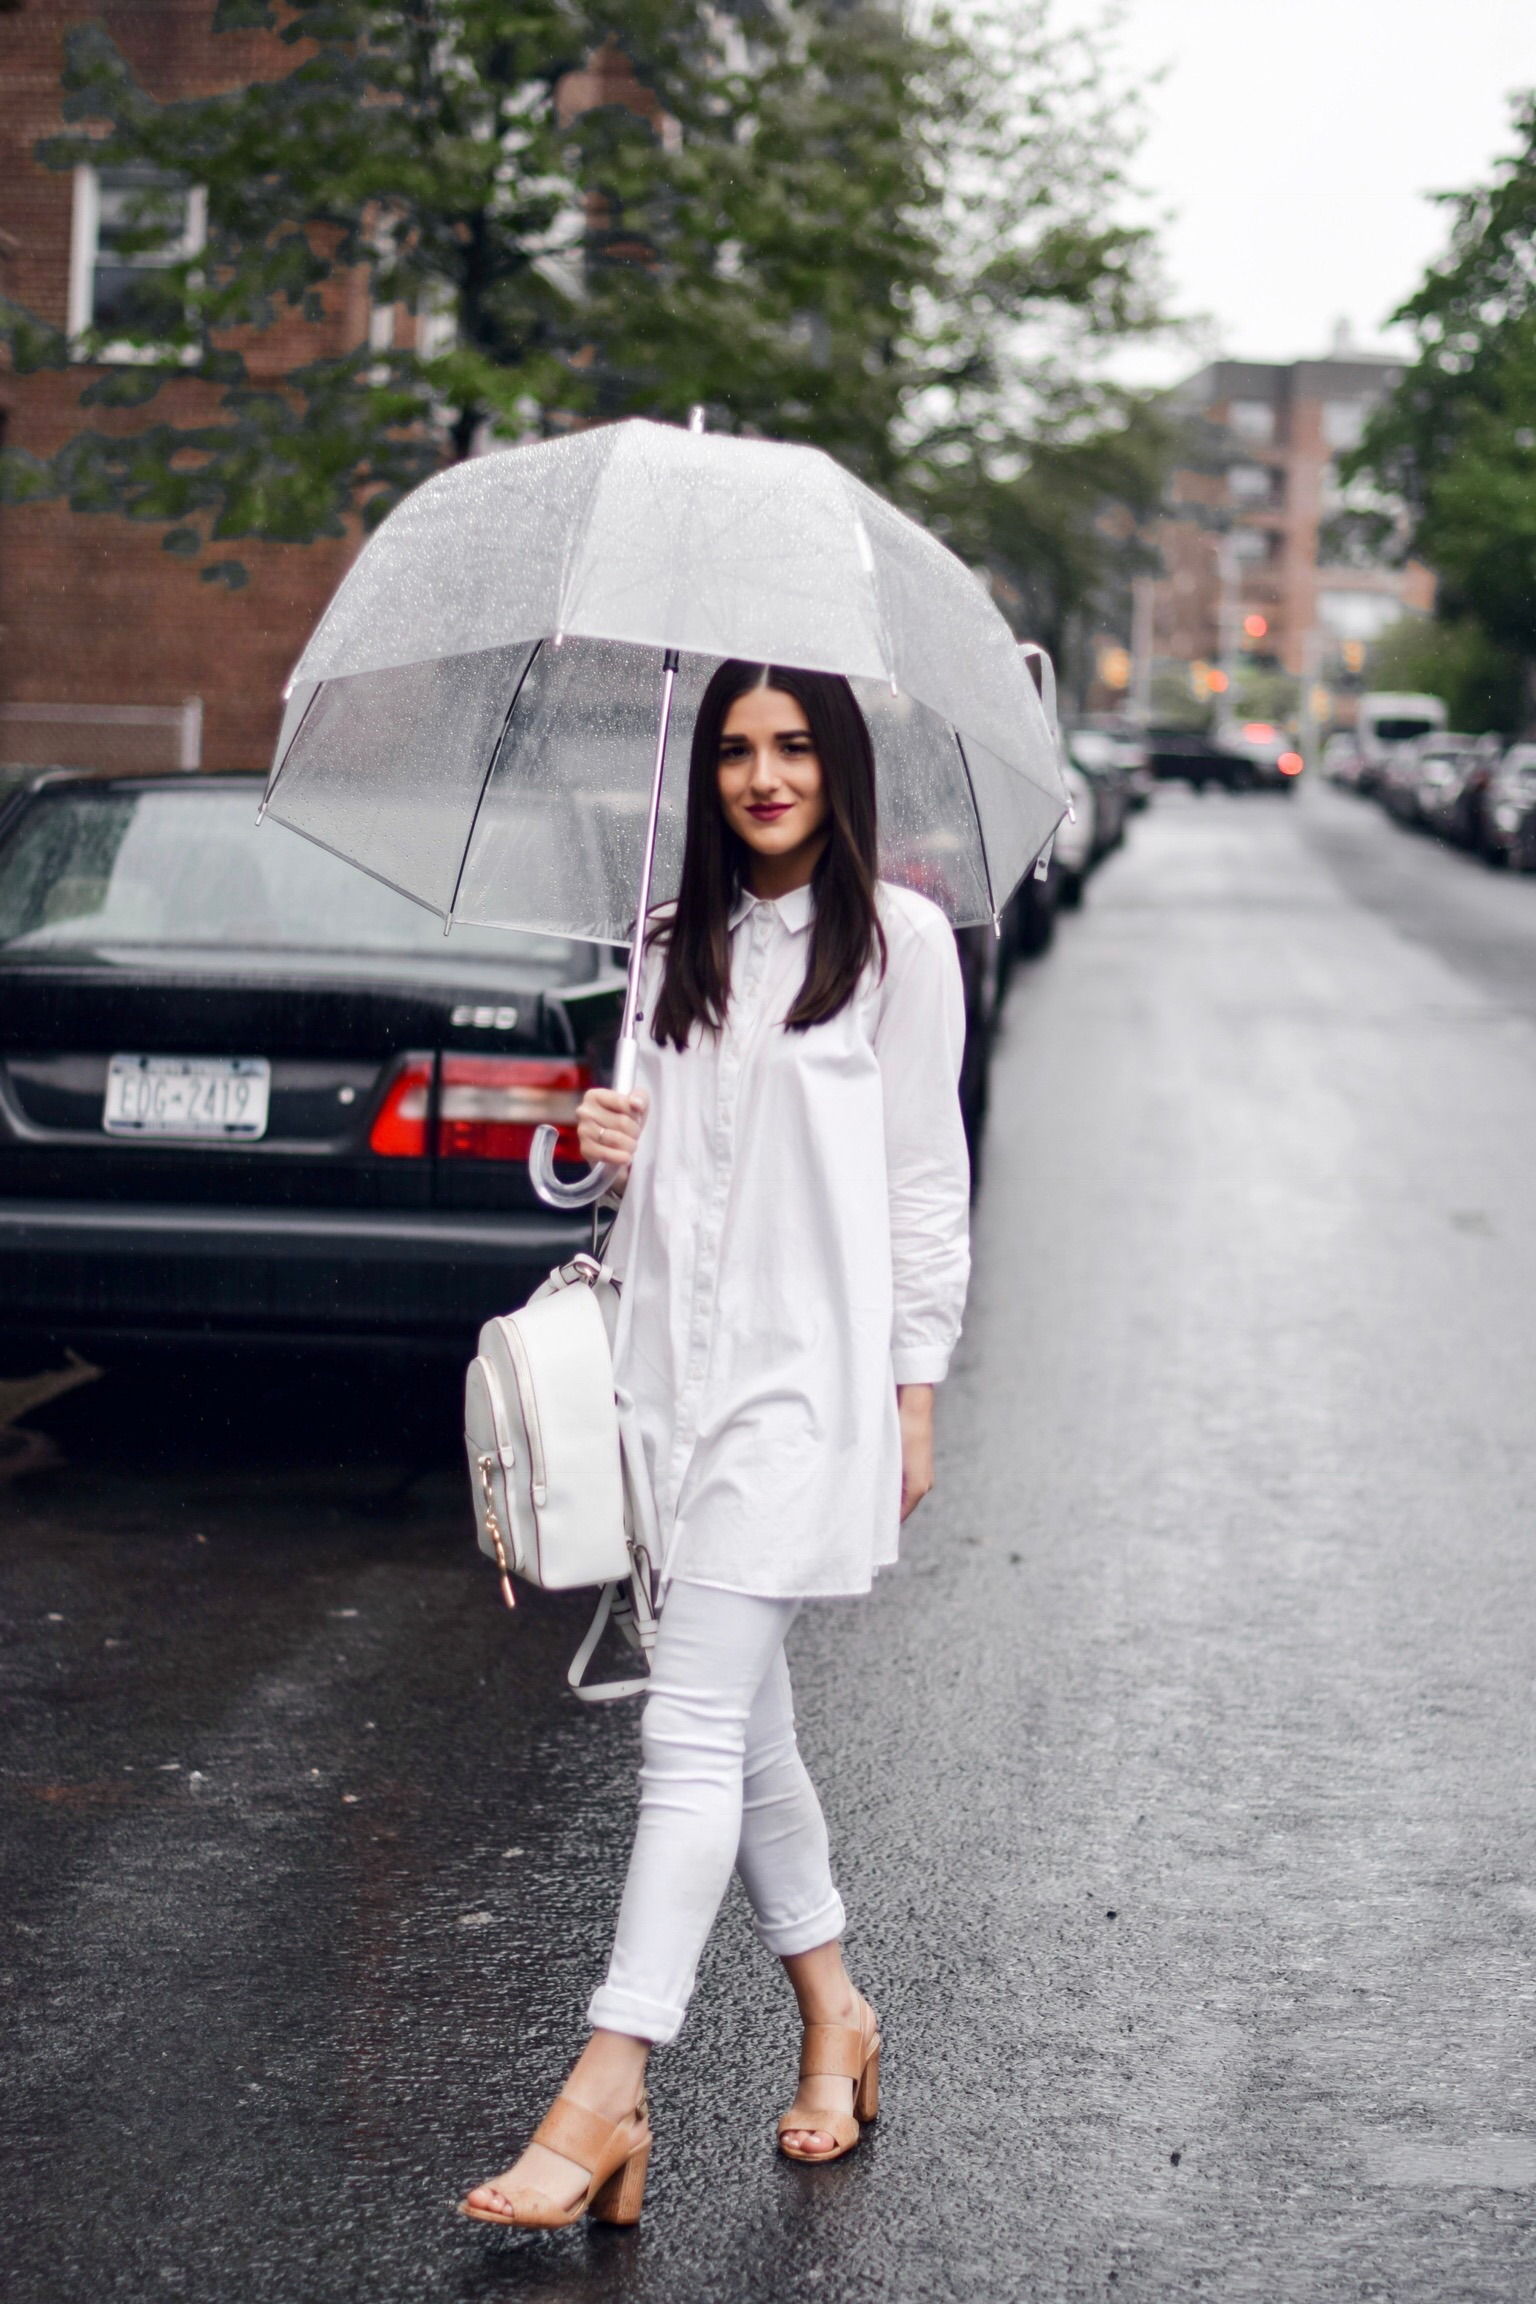 Why I Won't Be Bringing My Camera Or Laptop To Portugal Or Spain All White Look Esther Santer Fashion Blog NYC Street Style Blogger Outfit OOTD Trendy Shopping Umbrella Rainy Day Button Down Sandals Heels Zara Pants Straight Hair Girl Women New York.jpg